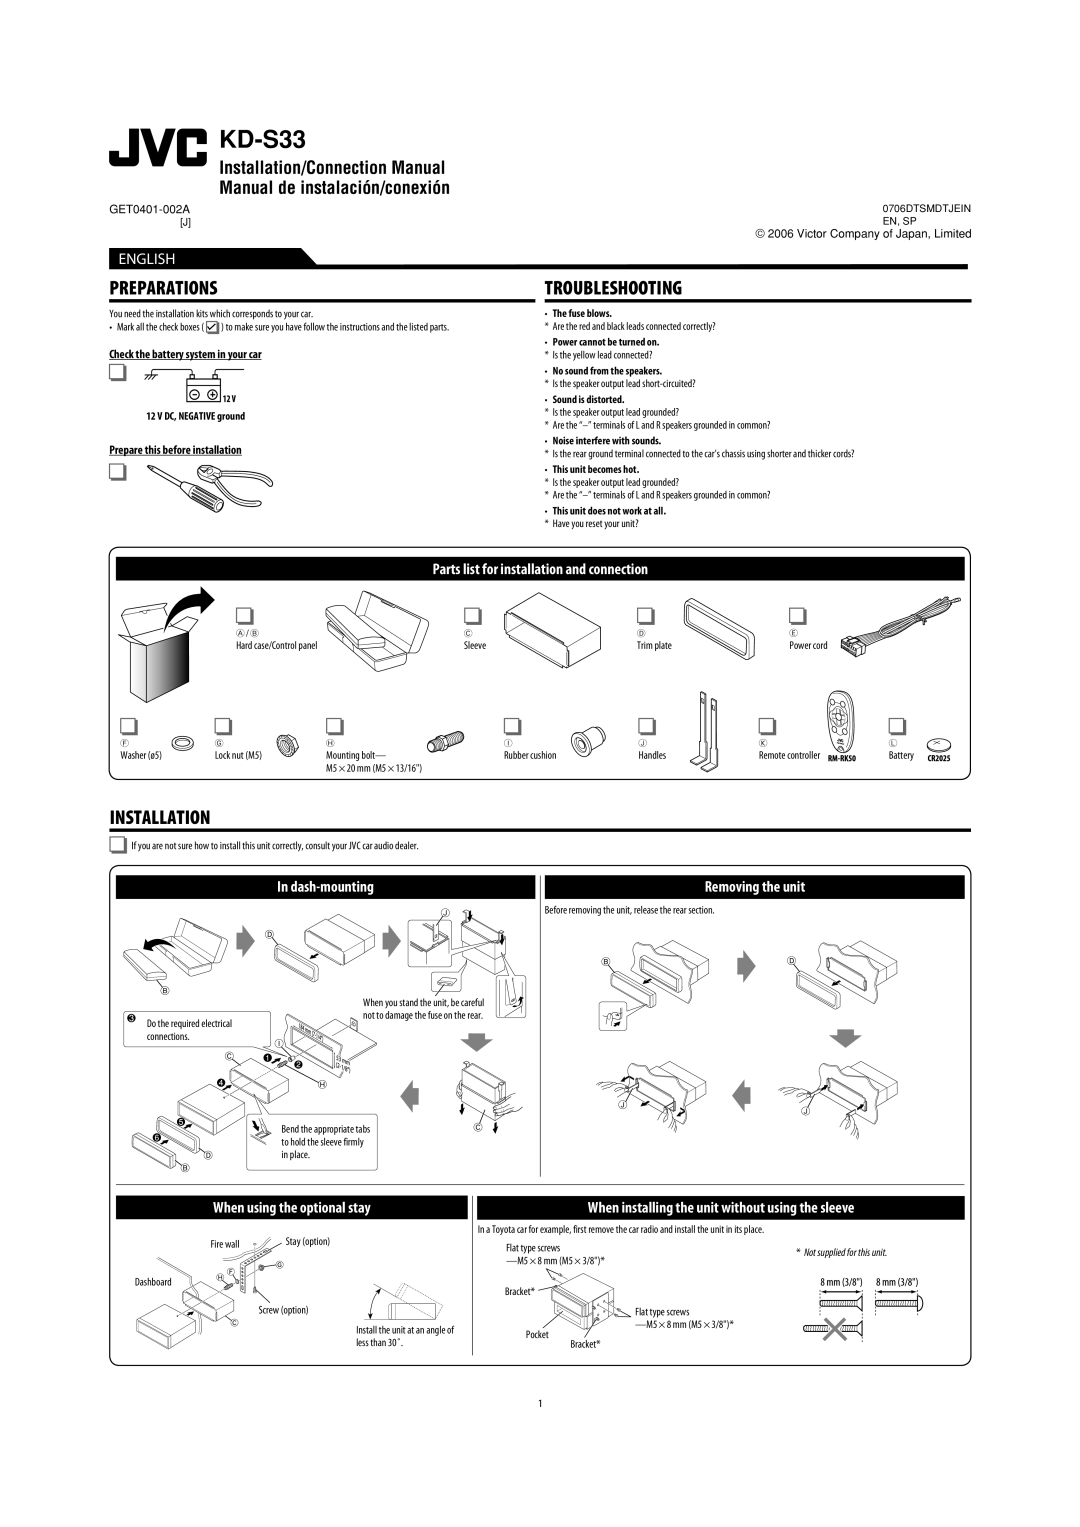 JVC KD-S33 manual Preparations, Troubleshooting, Installation, Parts list for installation and connection, In dash-mounting 